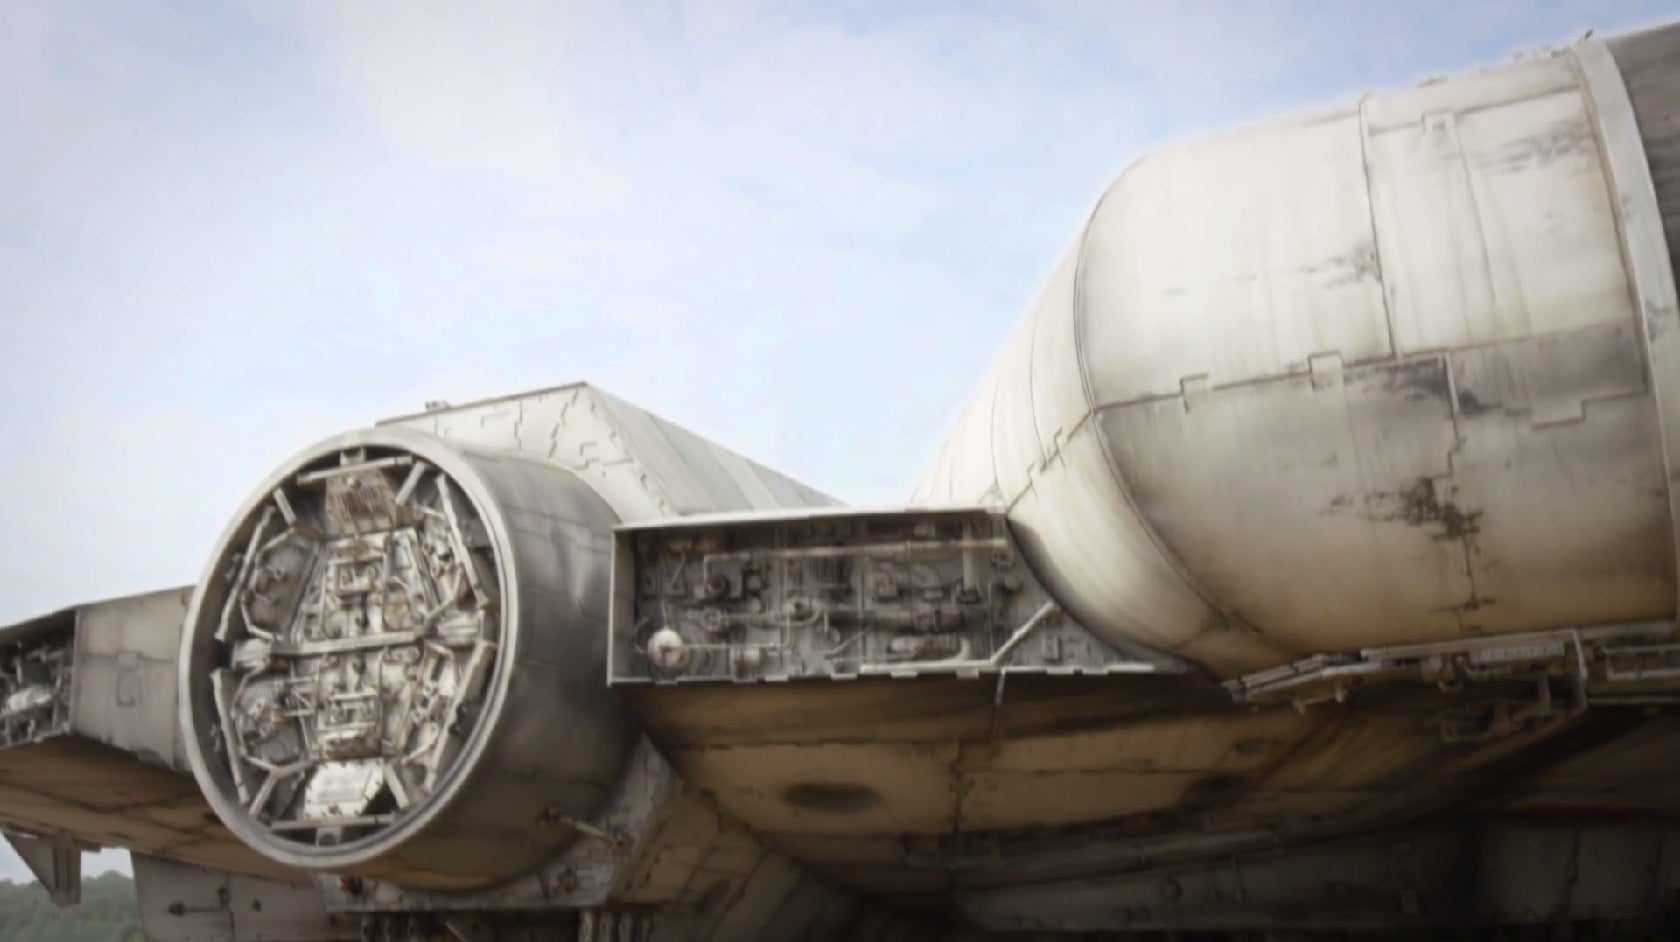 Star Wars Episode 7 Shows Off Millennium Falcon In New Video Gets In